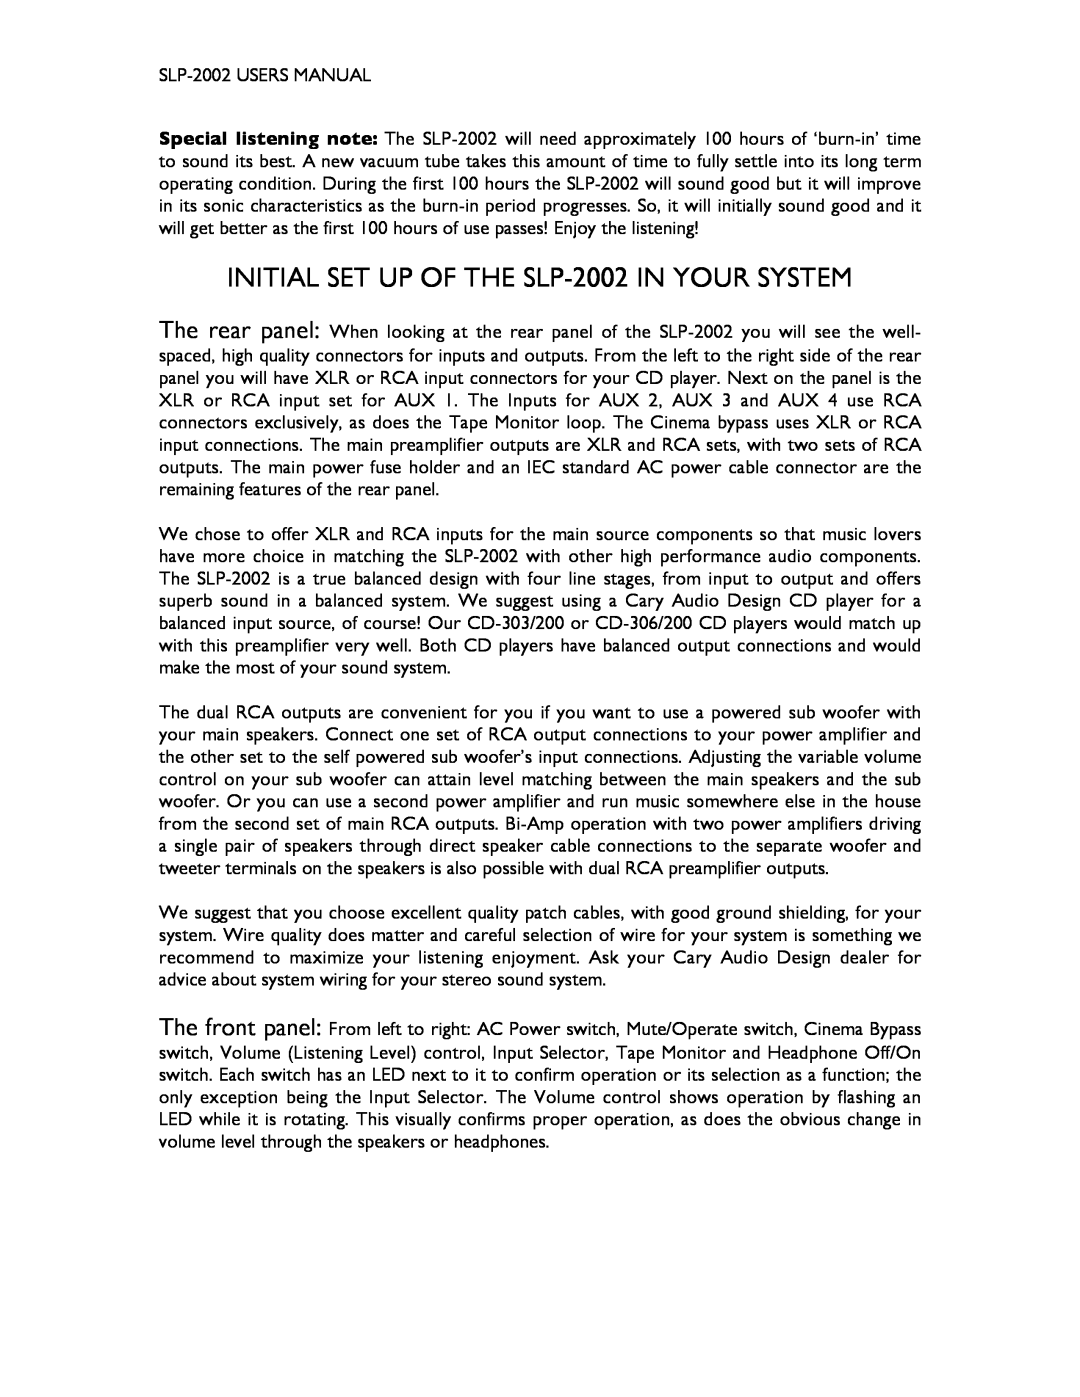 Cary Audio Design user manual INITIAL SET UP OF THE SLP-2002IN YOUR SYSTEM 